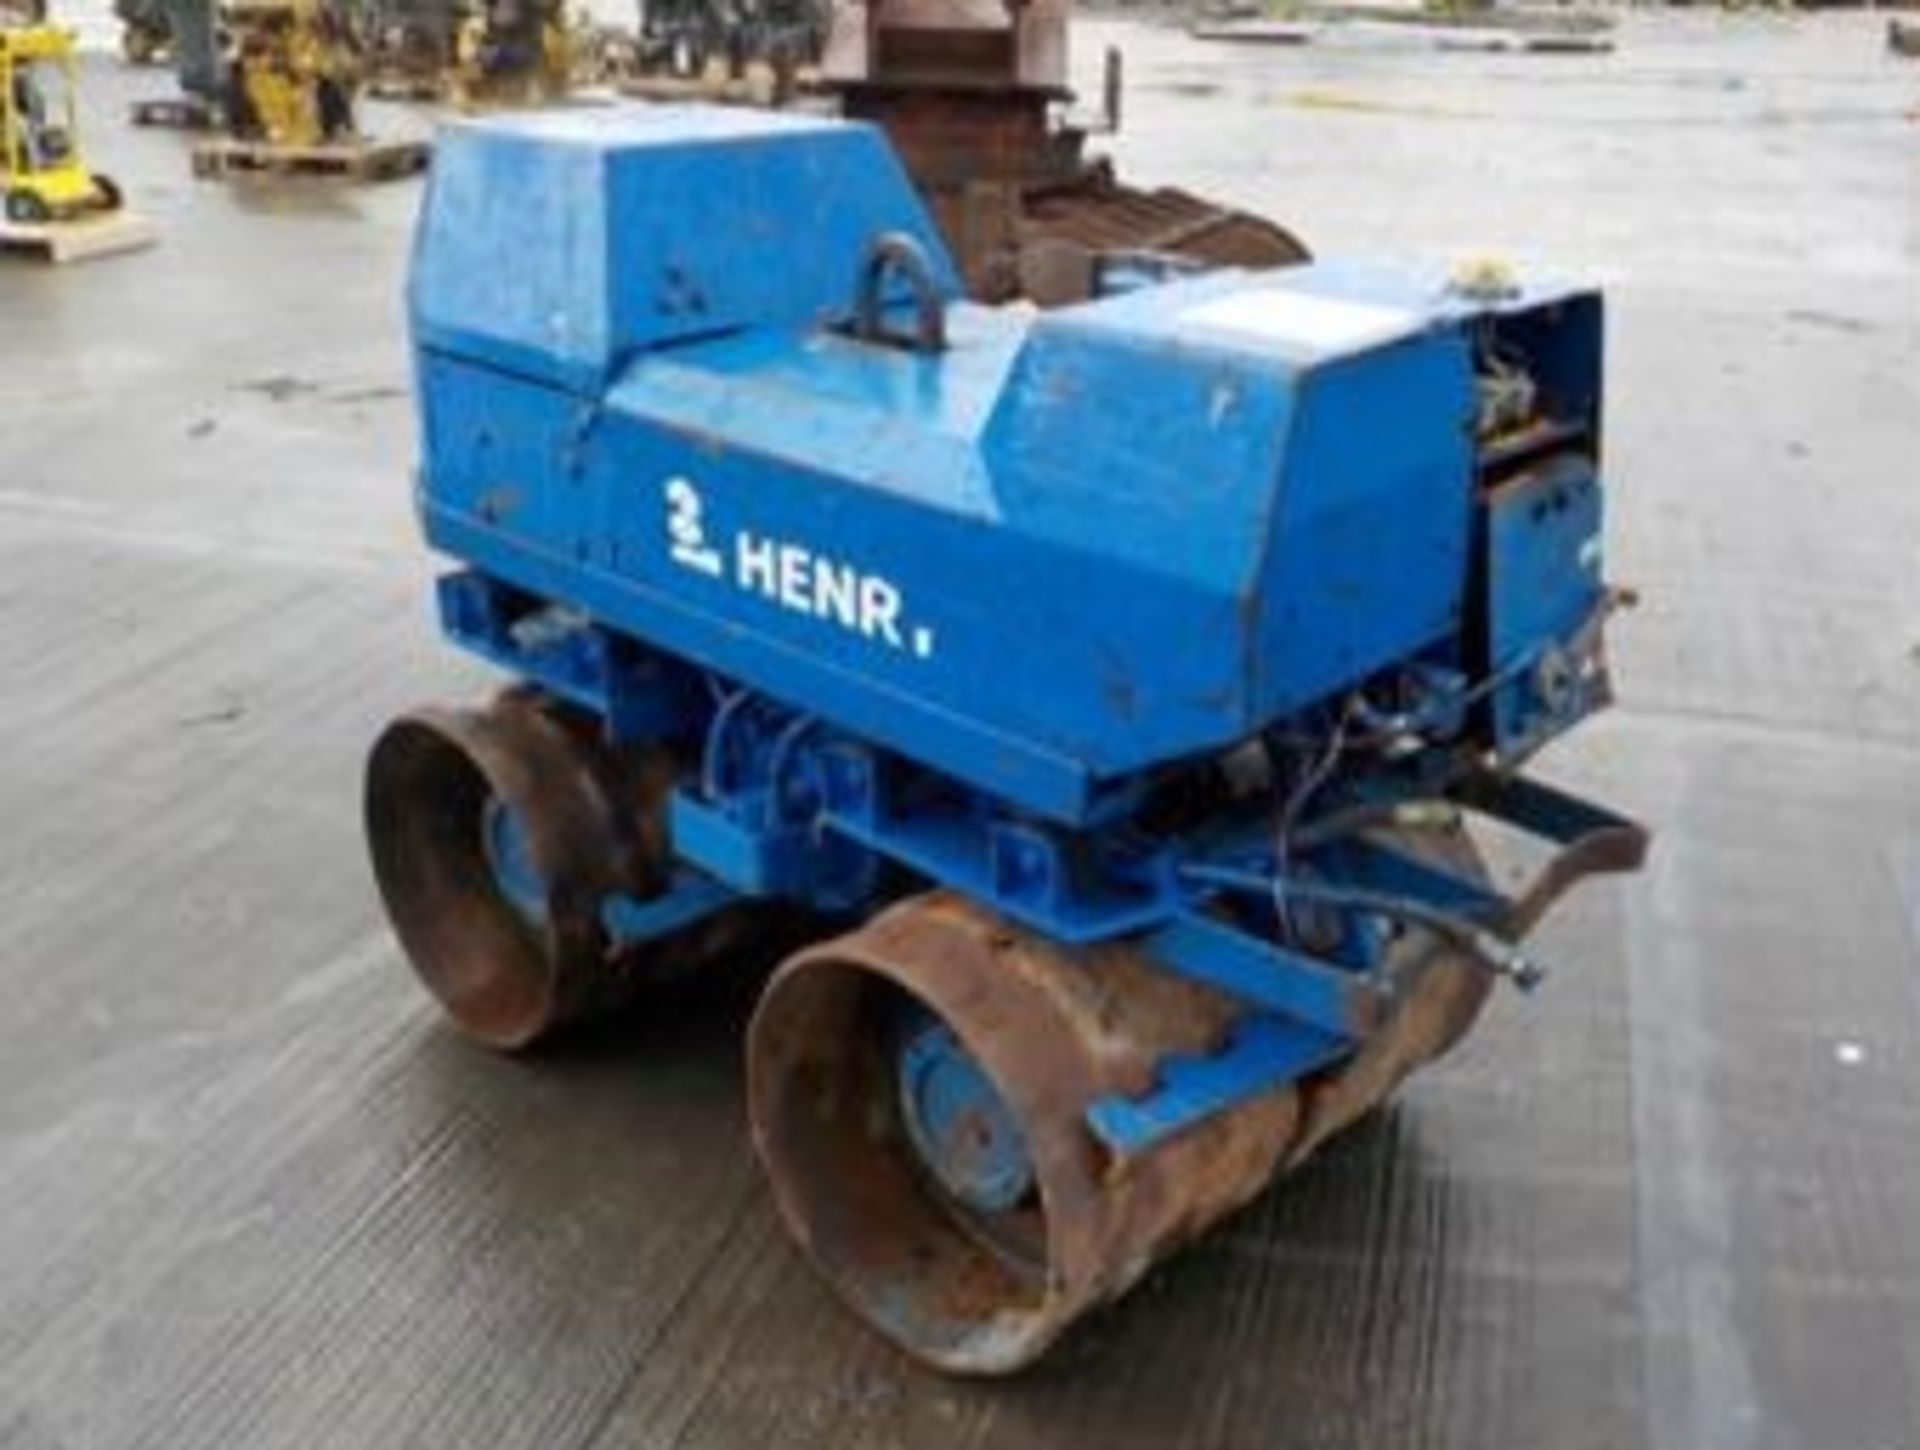 HATZ TWIN DRUM REMOTE CONTROL TRENCHER, DELIVERY ANYWHERE UK £175 *PLUS VAT* - Image 6 of 9